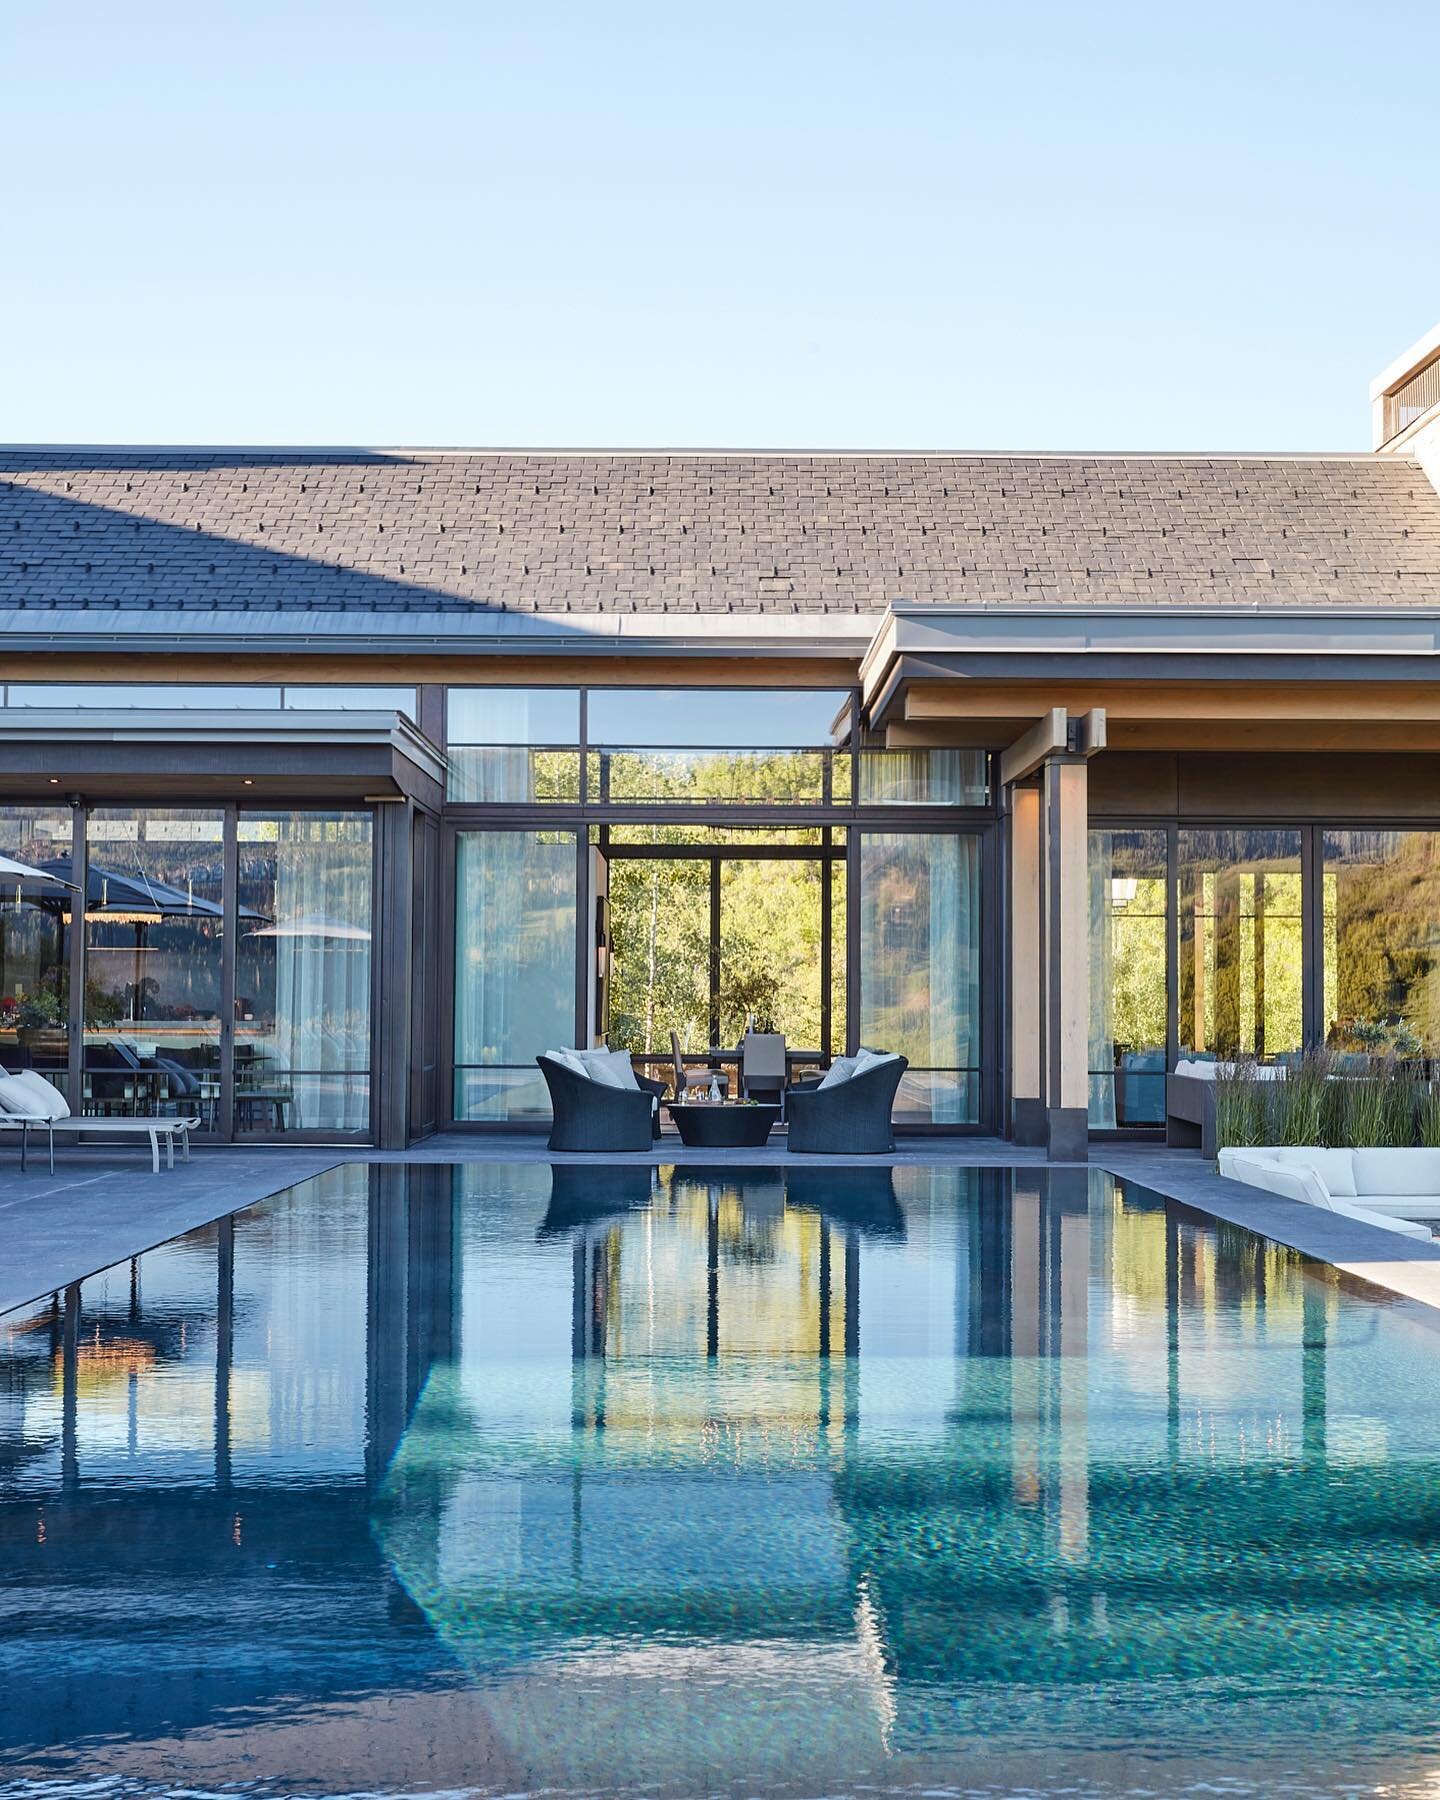 Every aspect of this home was designed to connect with nature.
&ldquo;Moveable glass walls encourage indoor-outdoor living, and spaces are arranged to provide direct access to the sloping site&rdquo; says @keithhowieaspen, lead architect and project 